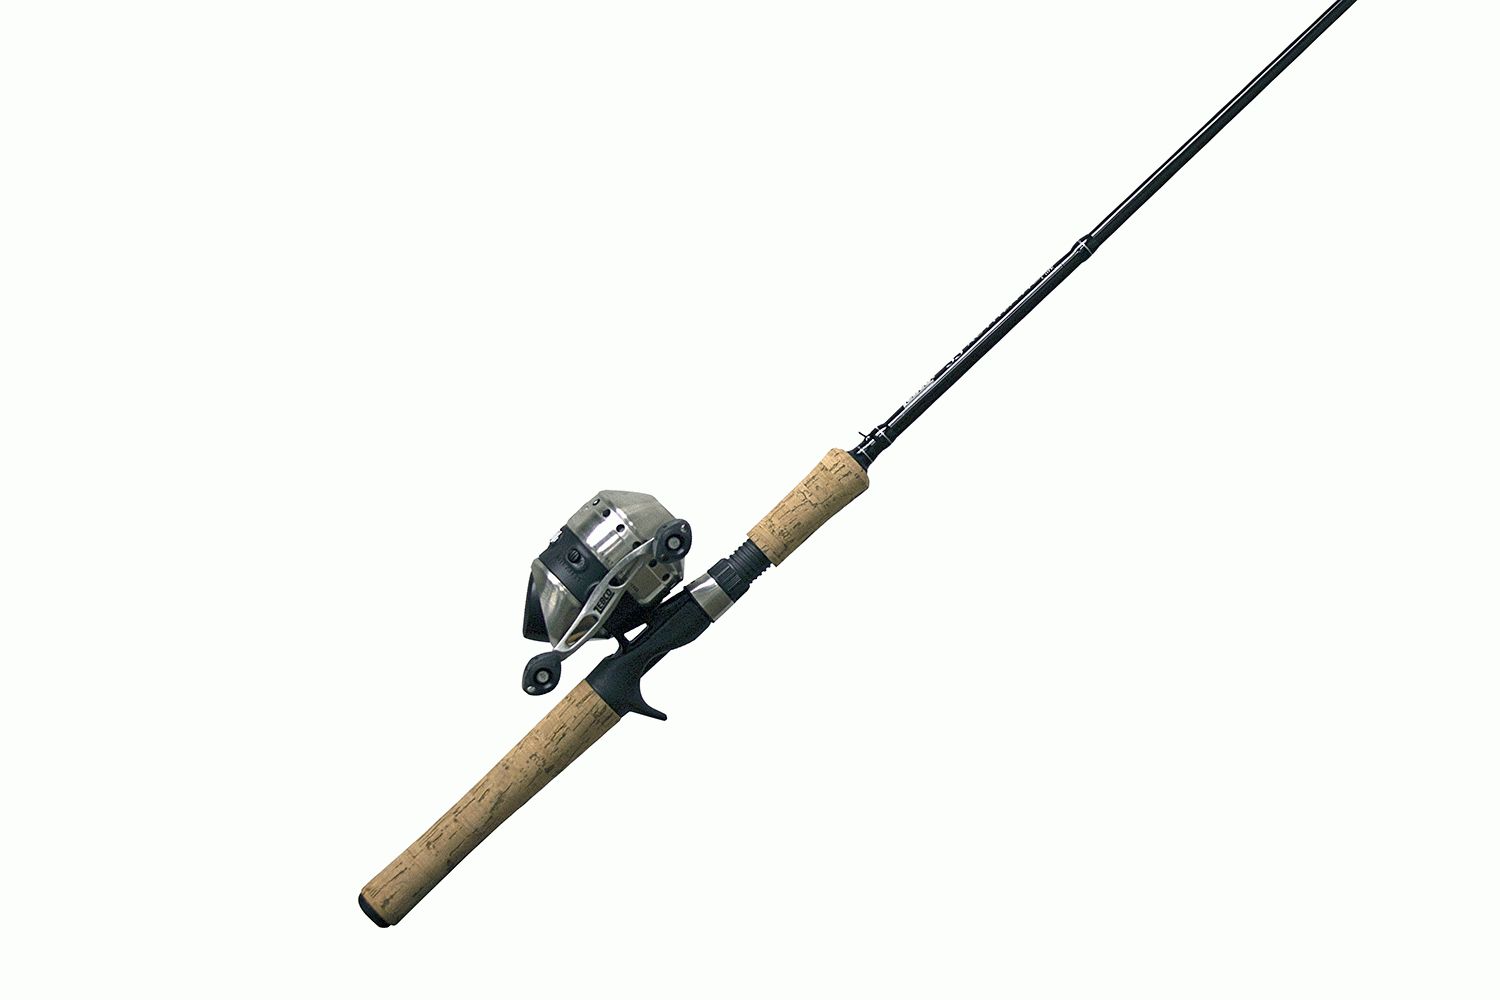 <p><b>Zebco Cork 33 Combo, $34.99</b></p> Fishing, pure and simple. The famous easy-casting Zebco 33 spincast is paired with an IM6 graphite construction rod with a natural cork handle. Perfect for going after panfish, catfish and bass at your favorite spot. <br> <a href=